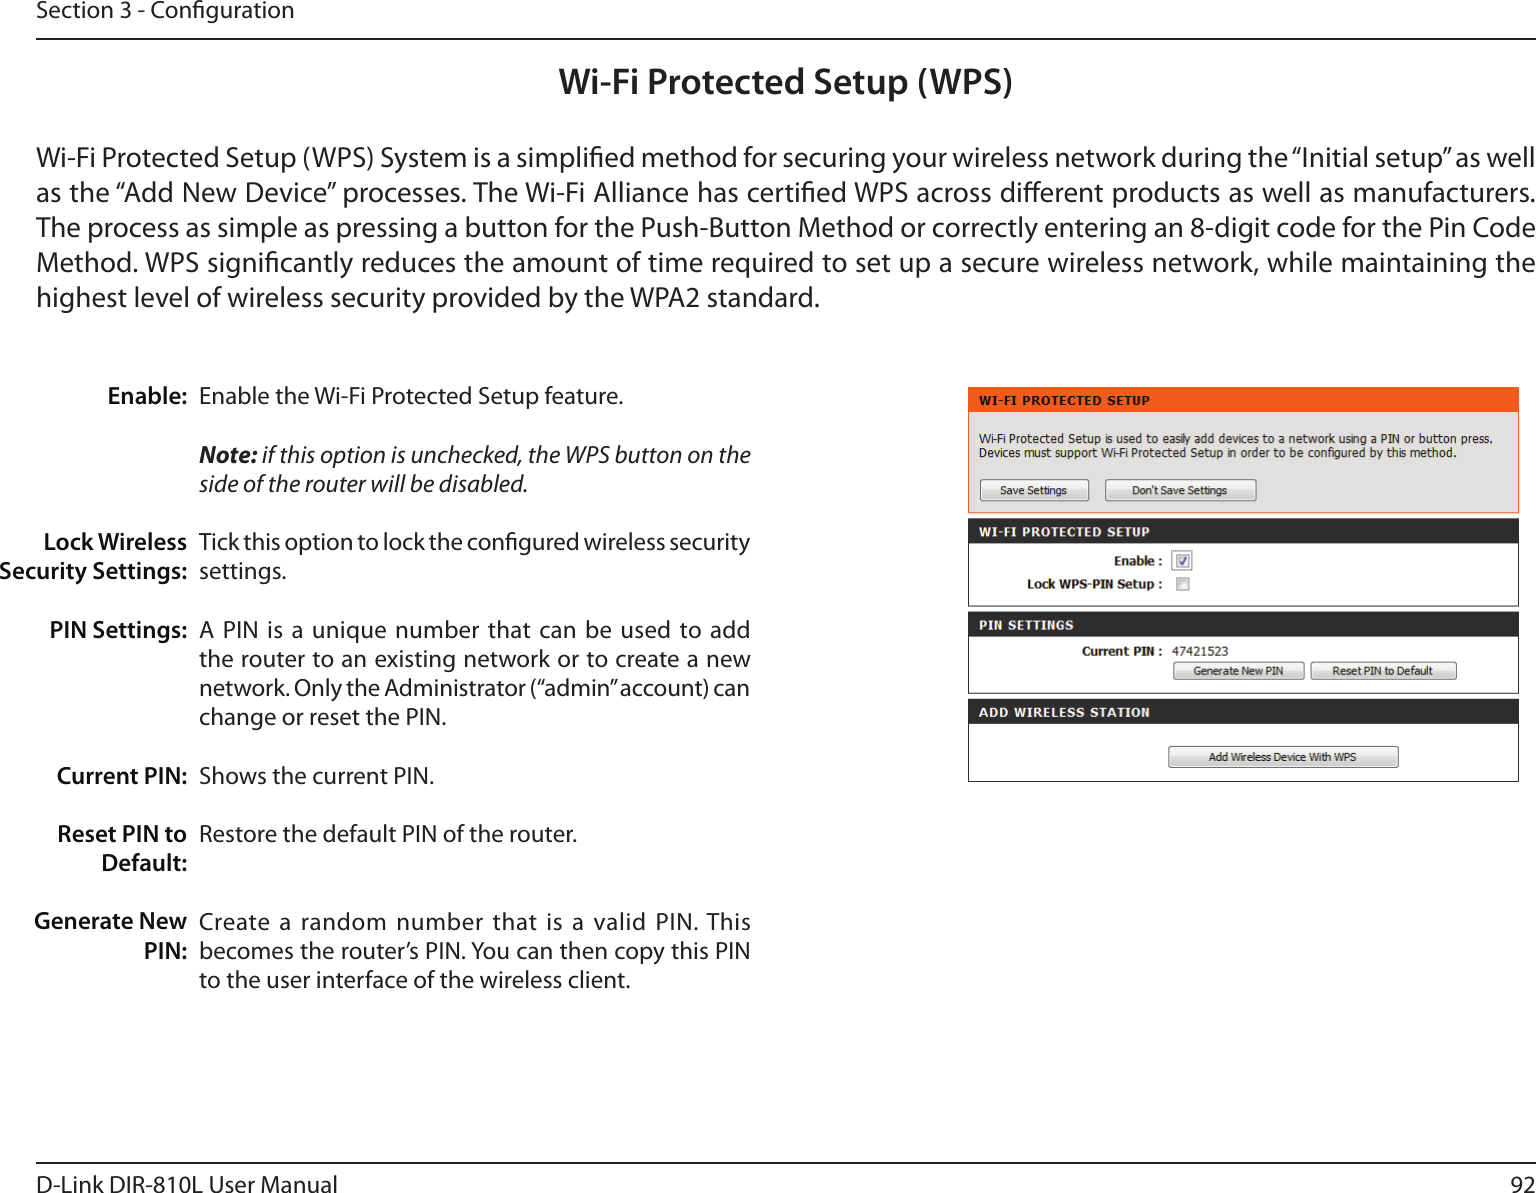 92D-Link DIR-810L User ManualSection 3 - CongurationWi-Fi Protected Setup (WPS)Enable the Wi-Fi Protected Setup feature. Note: if this option is unchecked, the WPS button on the side of the router will be disabled.Tick this option to lock the congured wireless security settings.A PIN  is a  unique  number that  can be used  to add the router to an existing network or to create a new network. Only the Administrator (“admin” account) can change or reset the PIN. Shows the current PIN. Restore the default PIN of the router. Create a  random number  that is  a valid PIN. This becomes the router’s PIN. You can then copy this PIN to the user interface of the wireless client.Enable:Lock Wireless Security Settings:PIN Settings:Current PIN:Reset PIN to Default:Generate New PIN:Wi-Fi Protected Setup (WPS) System is a simplied method for securing your wireless network during the “Initial setup” as well as the “Add New Device” processes. The Wi-Fi Alliance has certied WPS across dierent products as well as manufacturers. The process as simple as pressing a button for the Push-Button Method or correctly entering an 8-digit code for the Pin Code Method. WPS signicantly reduces the amount of time required to set up a secure wireless network, while maintaining the highest level of wireless security provided by the WPA2 standard.